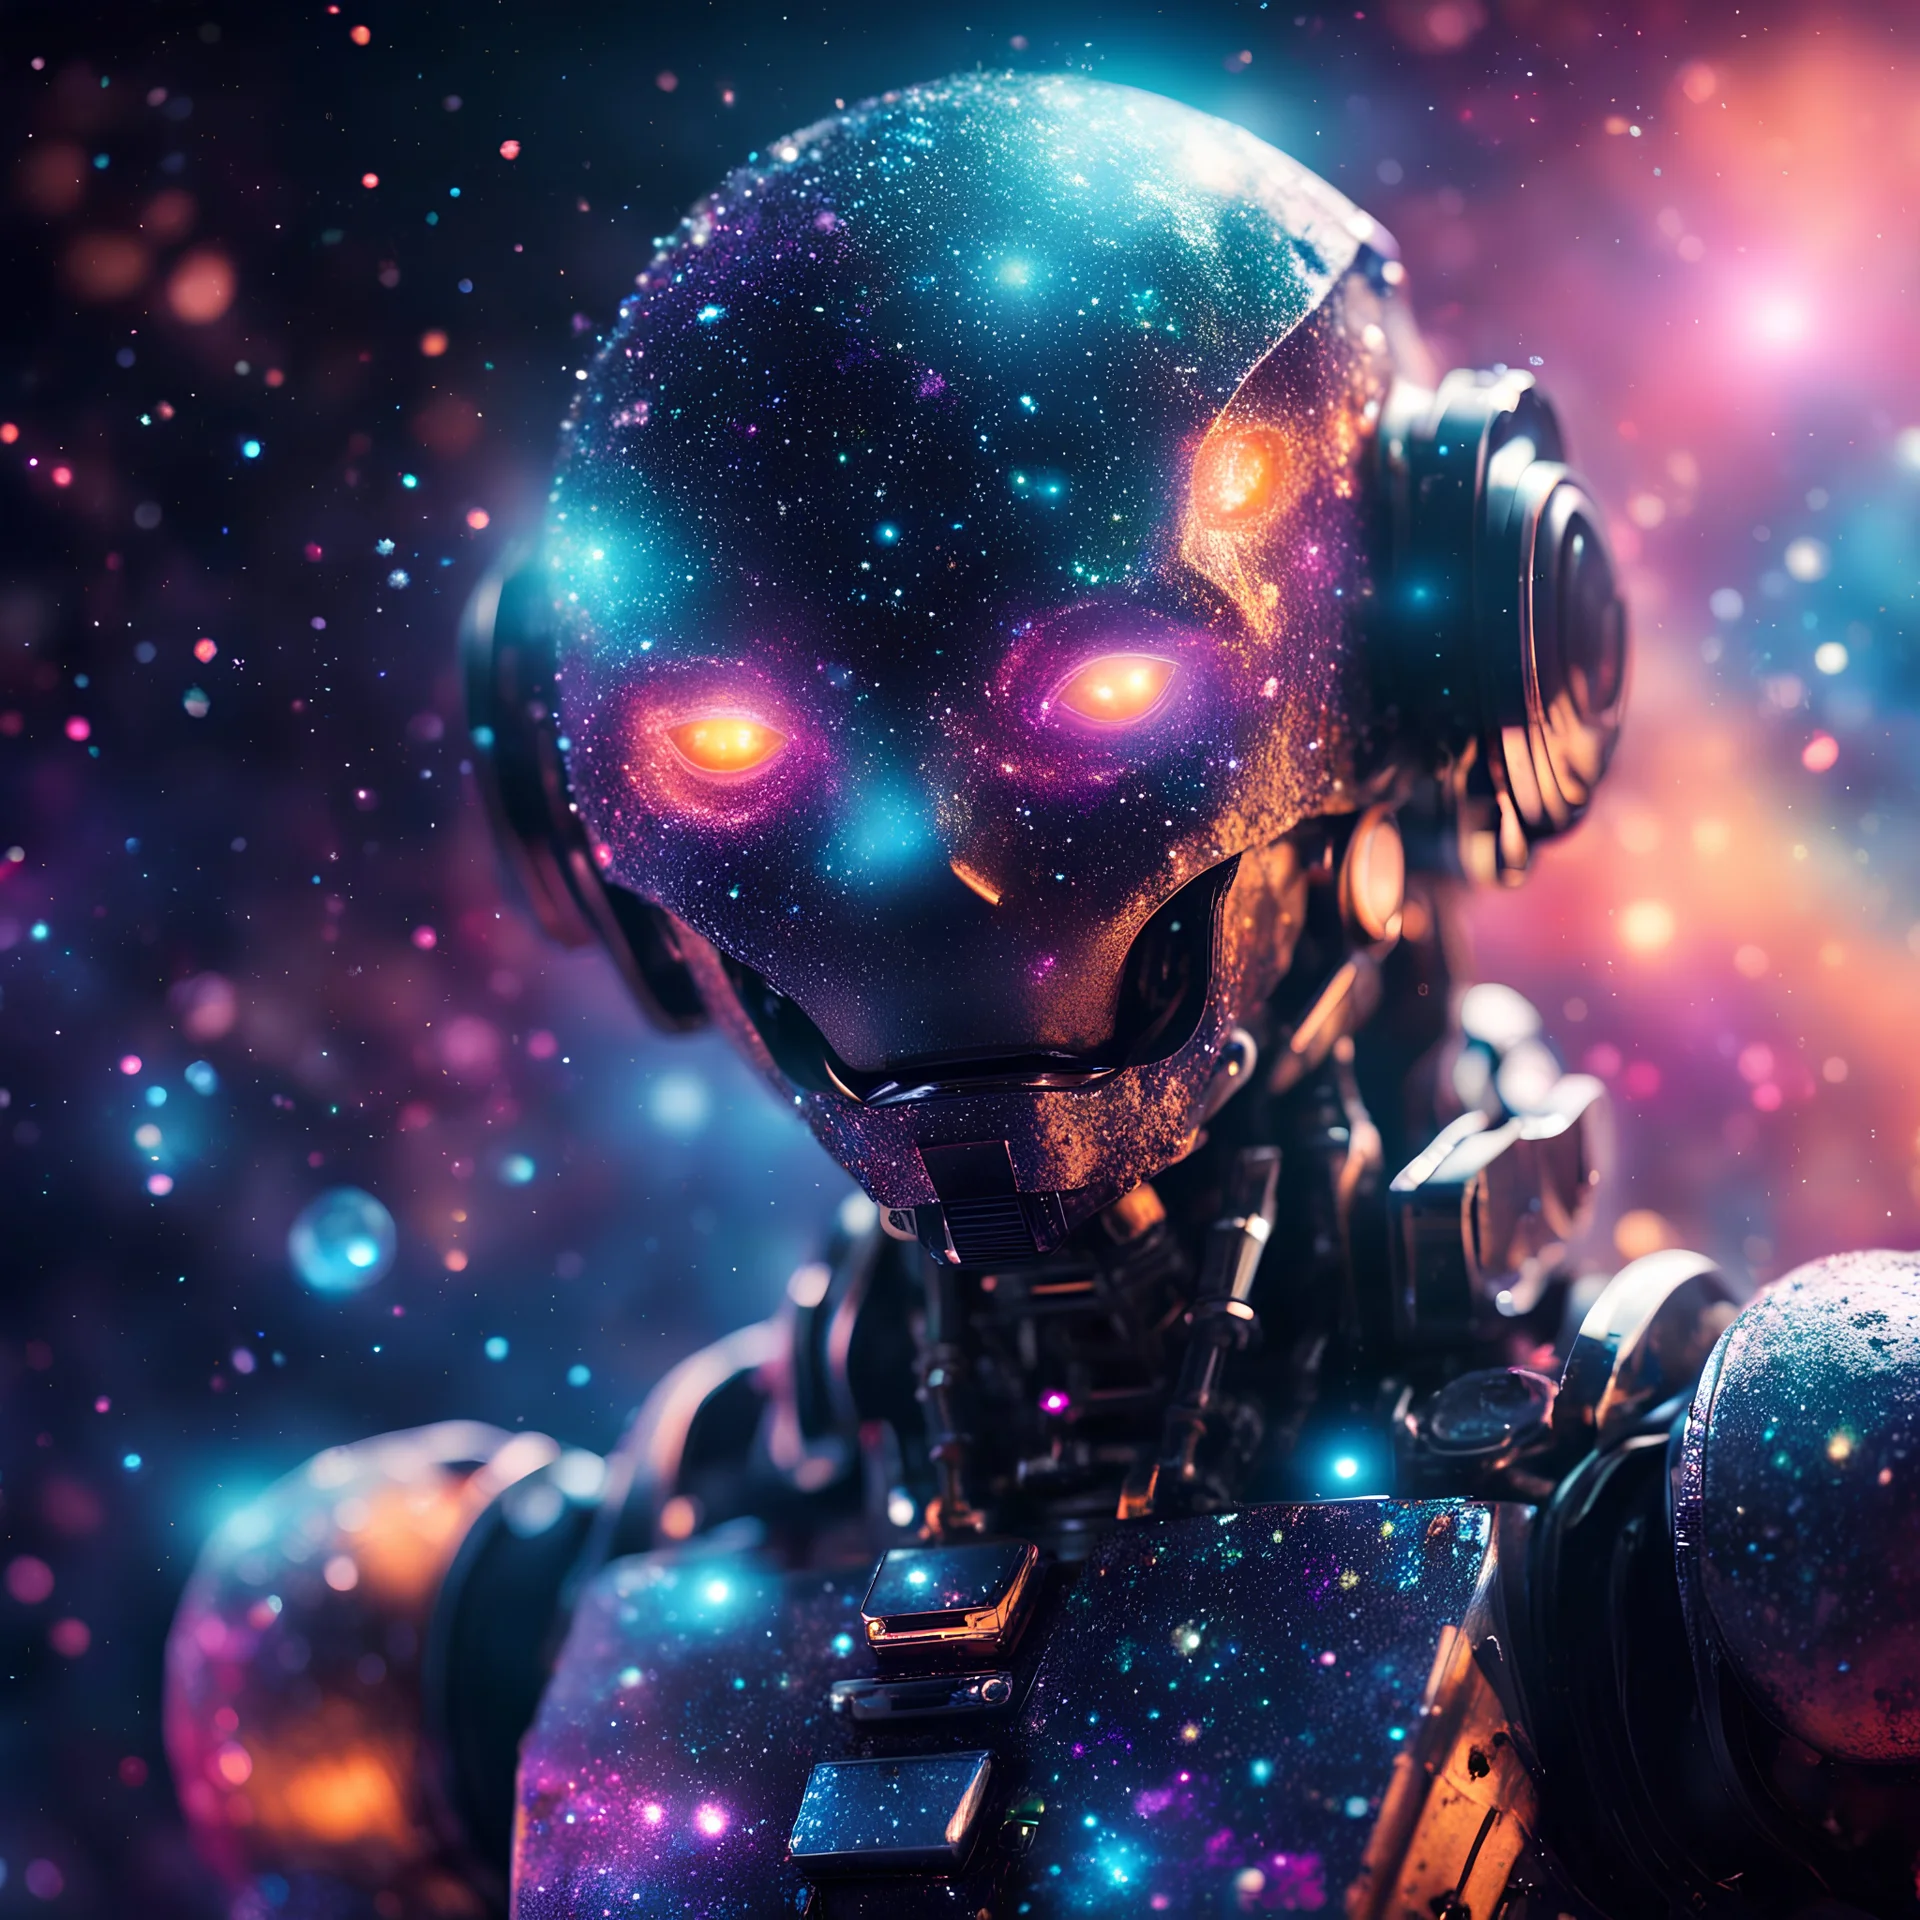 space robot covered with glowing crystals, nebula particles in air, in space, galaxy in background, bright colors, glowing sparkle particles, dark tone, sharp focus, high contrast, 8k, incredible depth, depth of field, dramatic lighting, beautifully intricate details, clean environment, epic dynamic scene